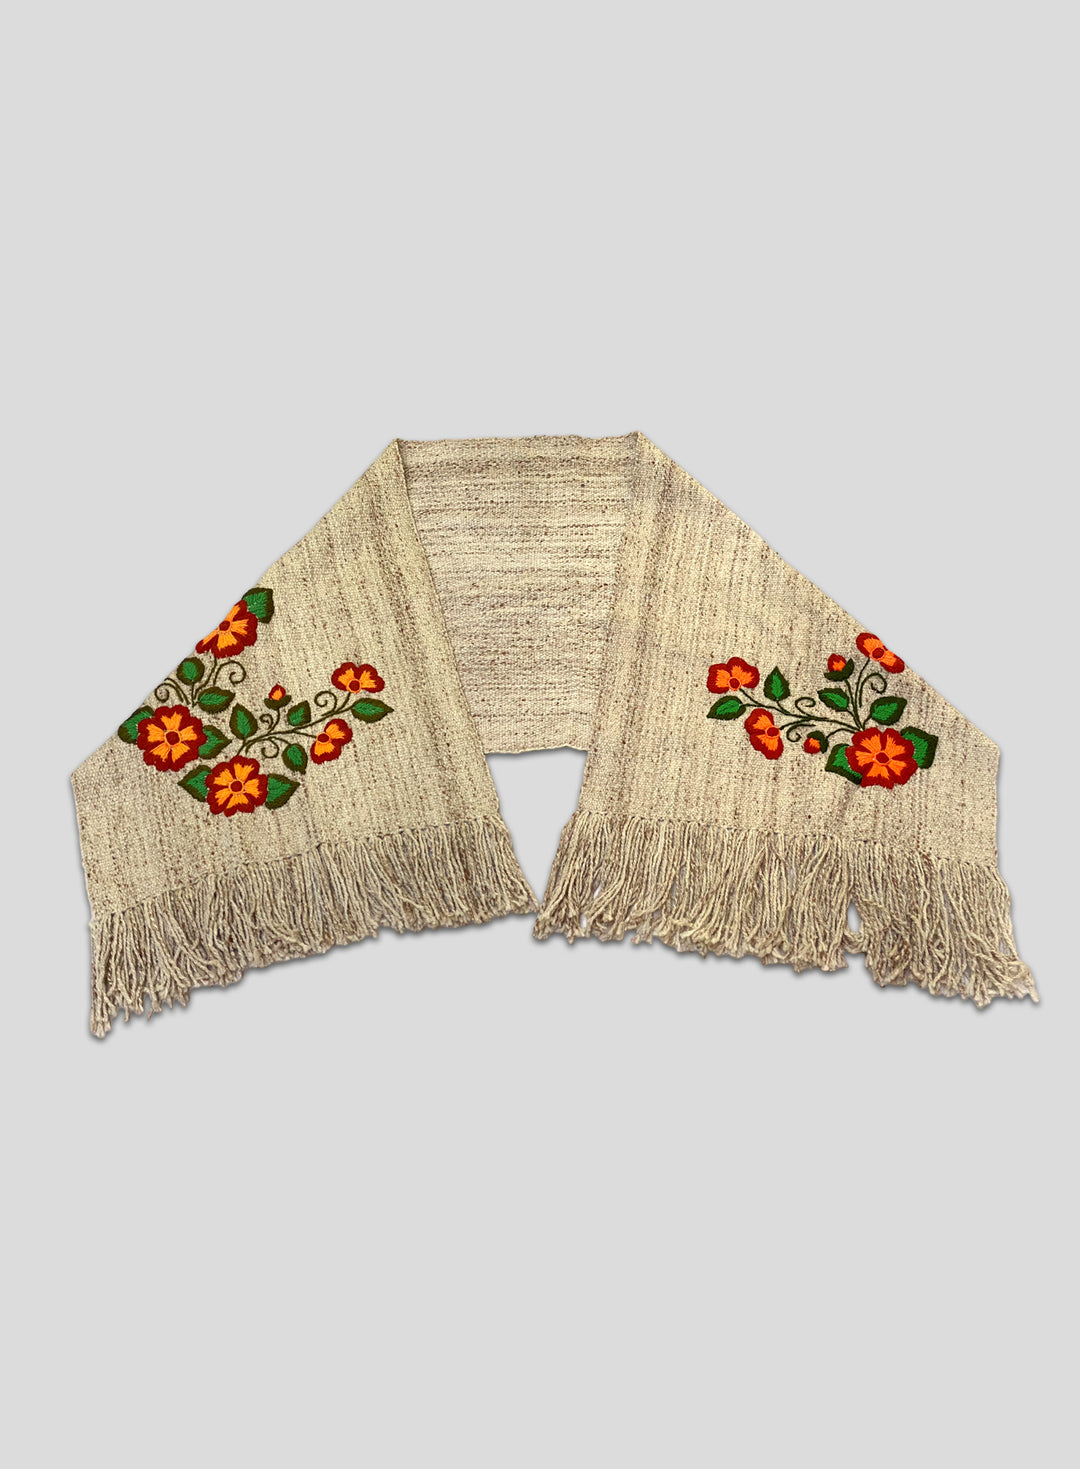 Hand-Knitted and Embroidered Ruana